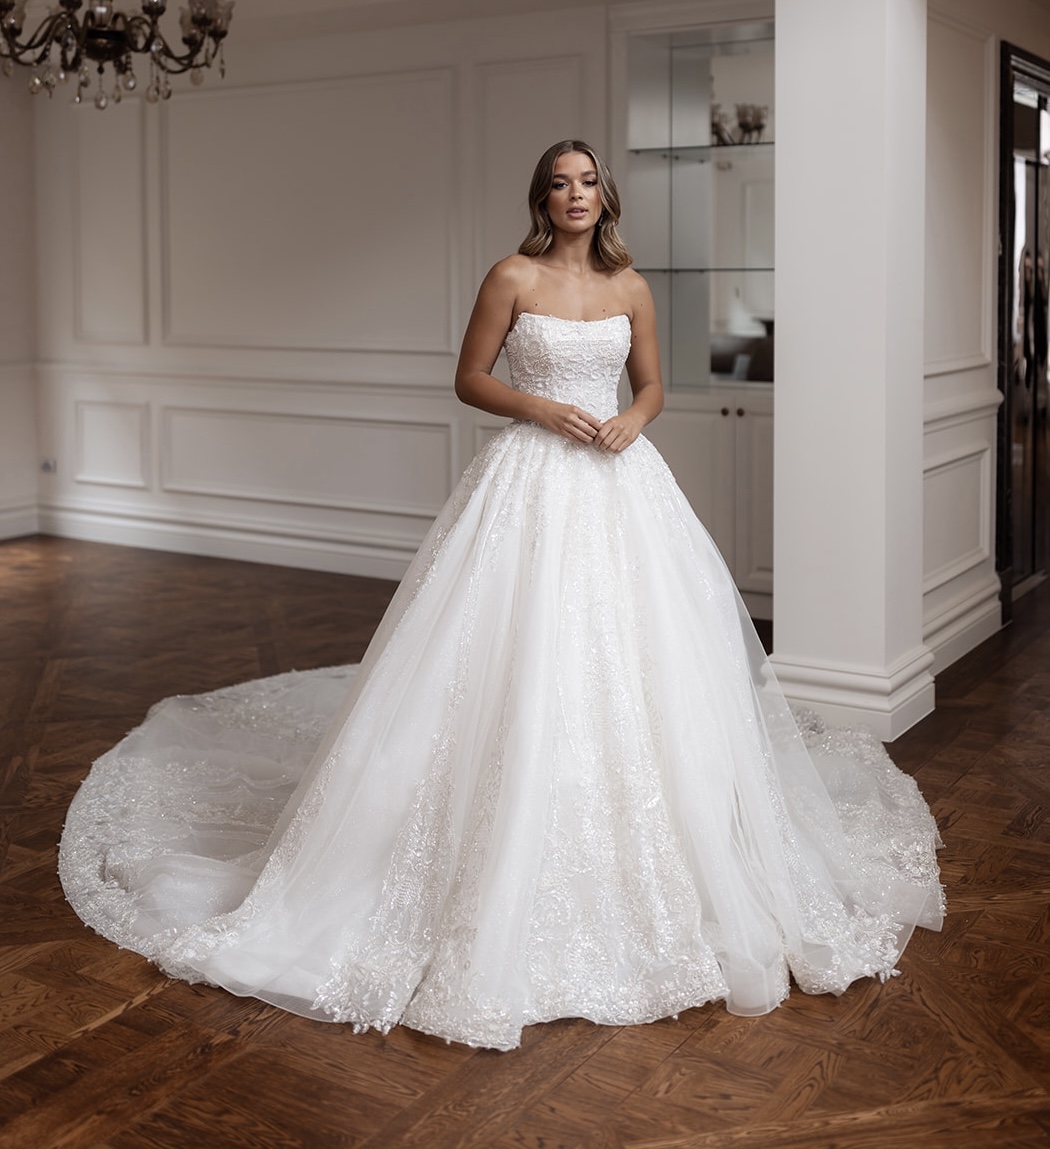 The Classic Ball Gown & You